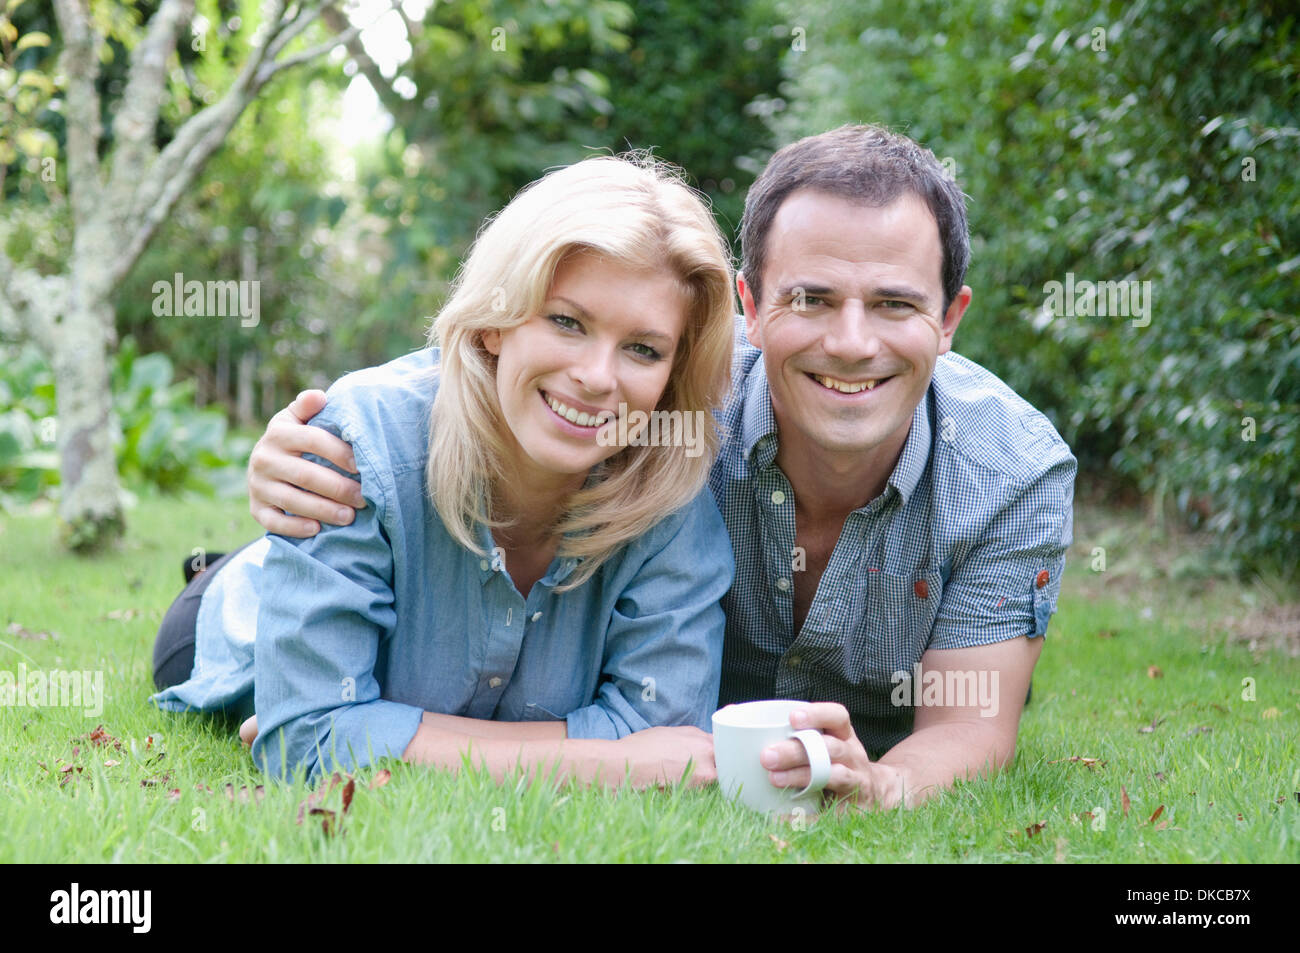 Young couple relaxing in garden Banque D'Images